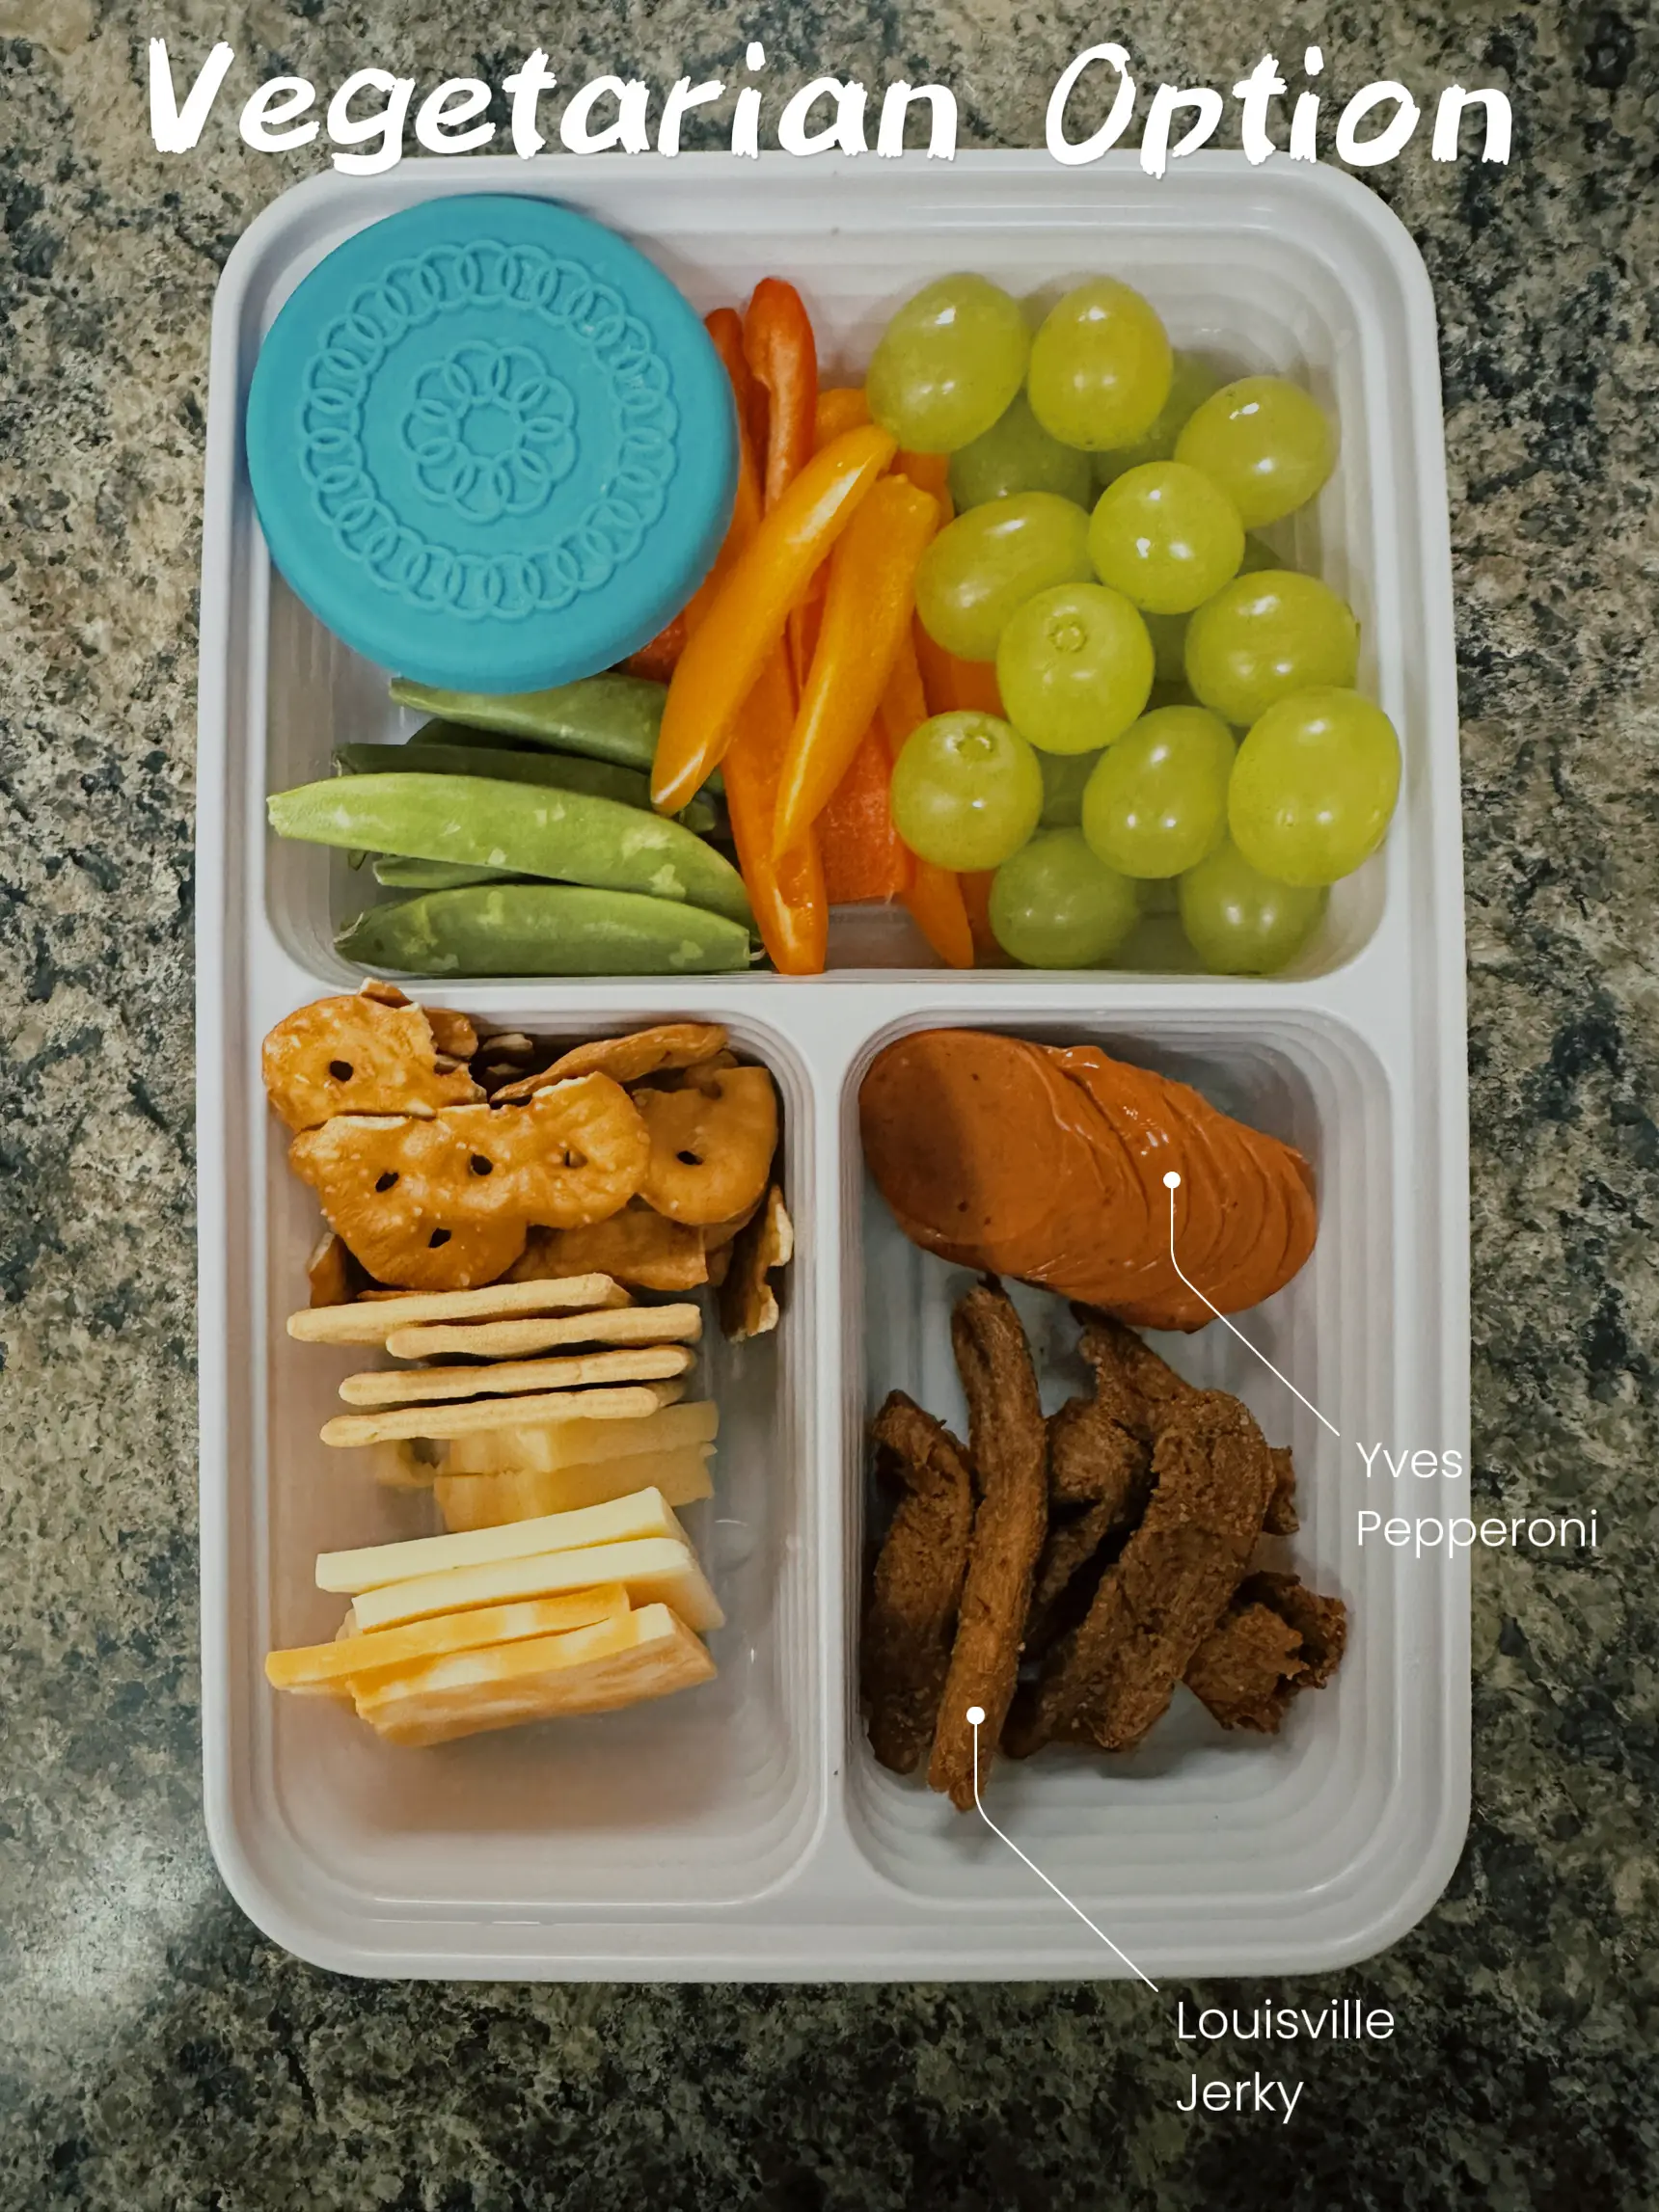 Adult Lunchable Meal Prep, Gallery posted by VeezyWho